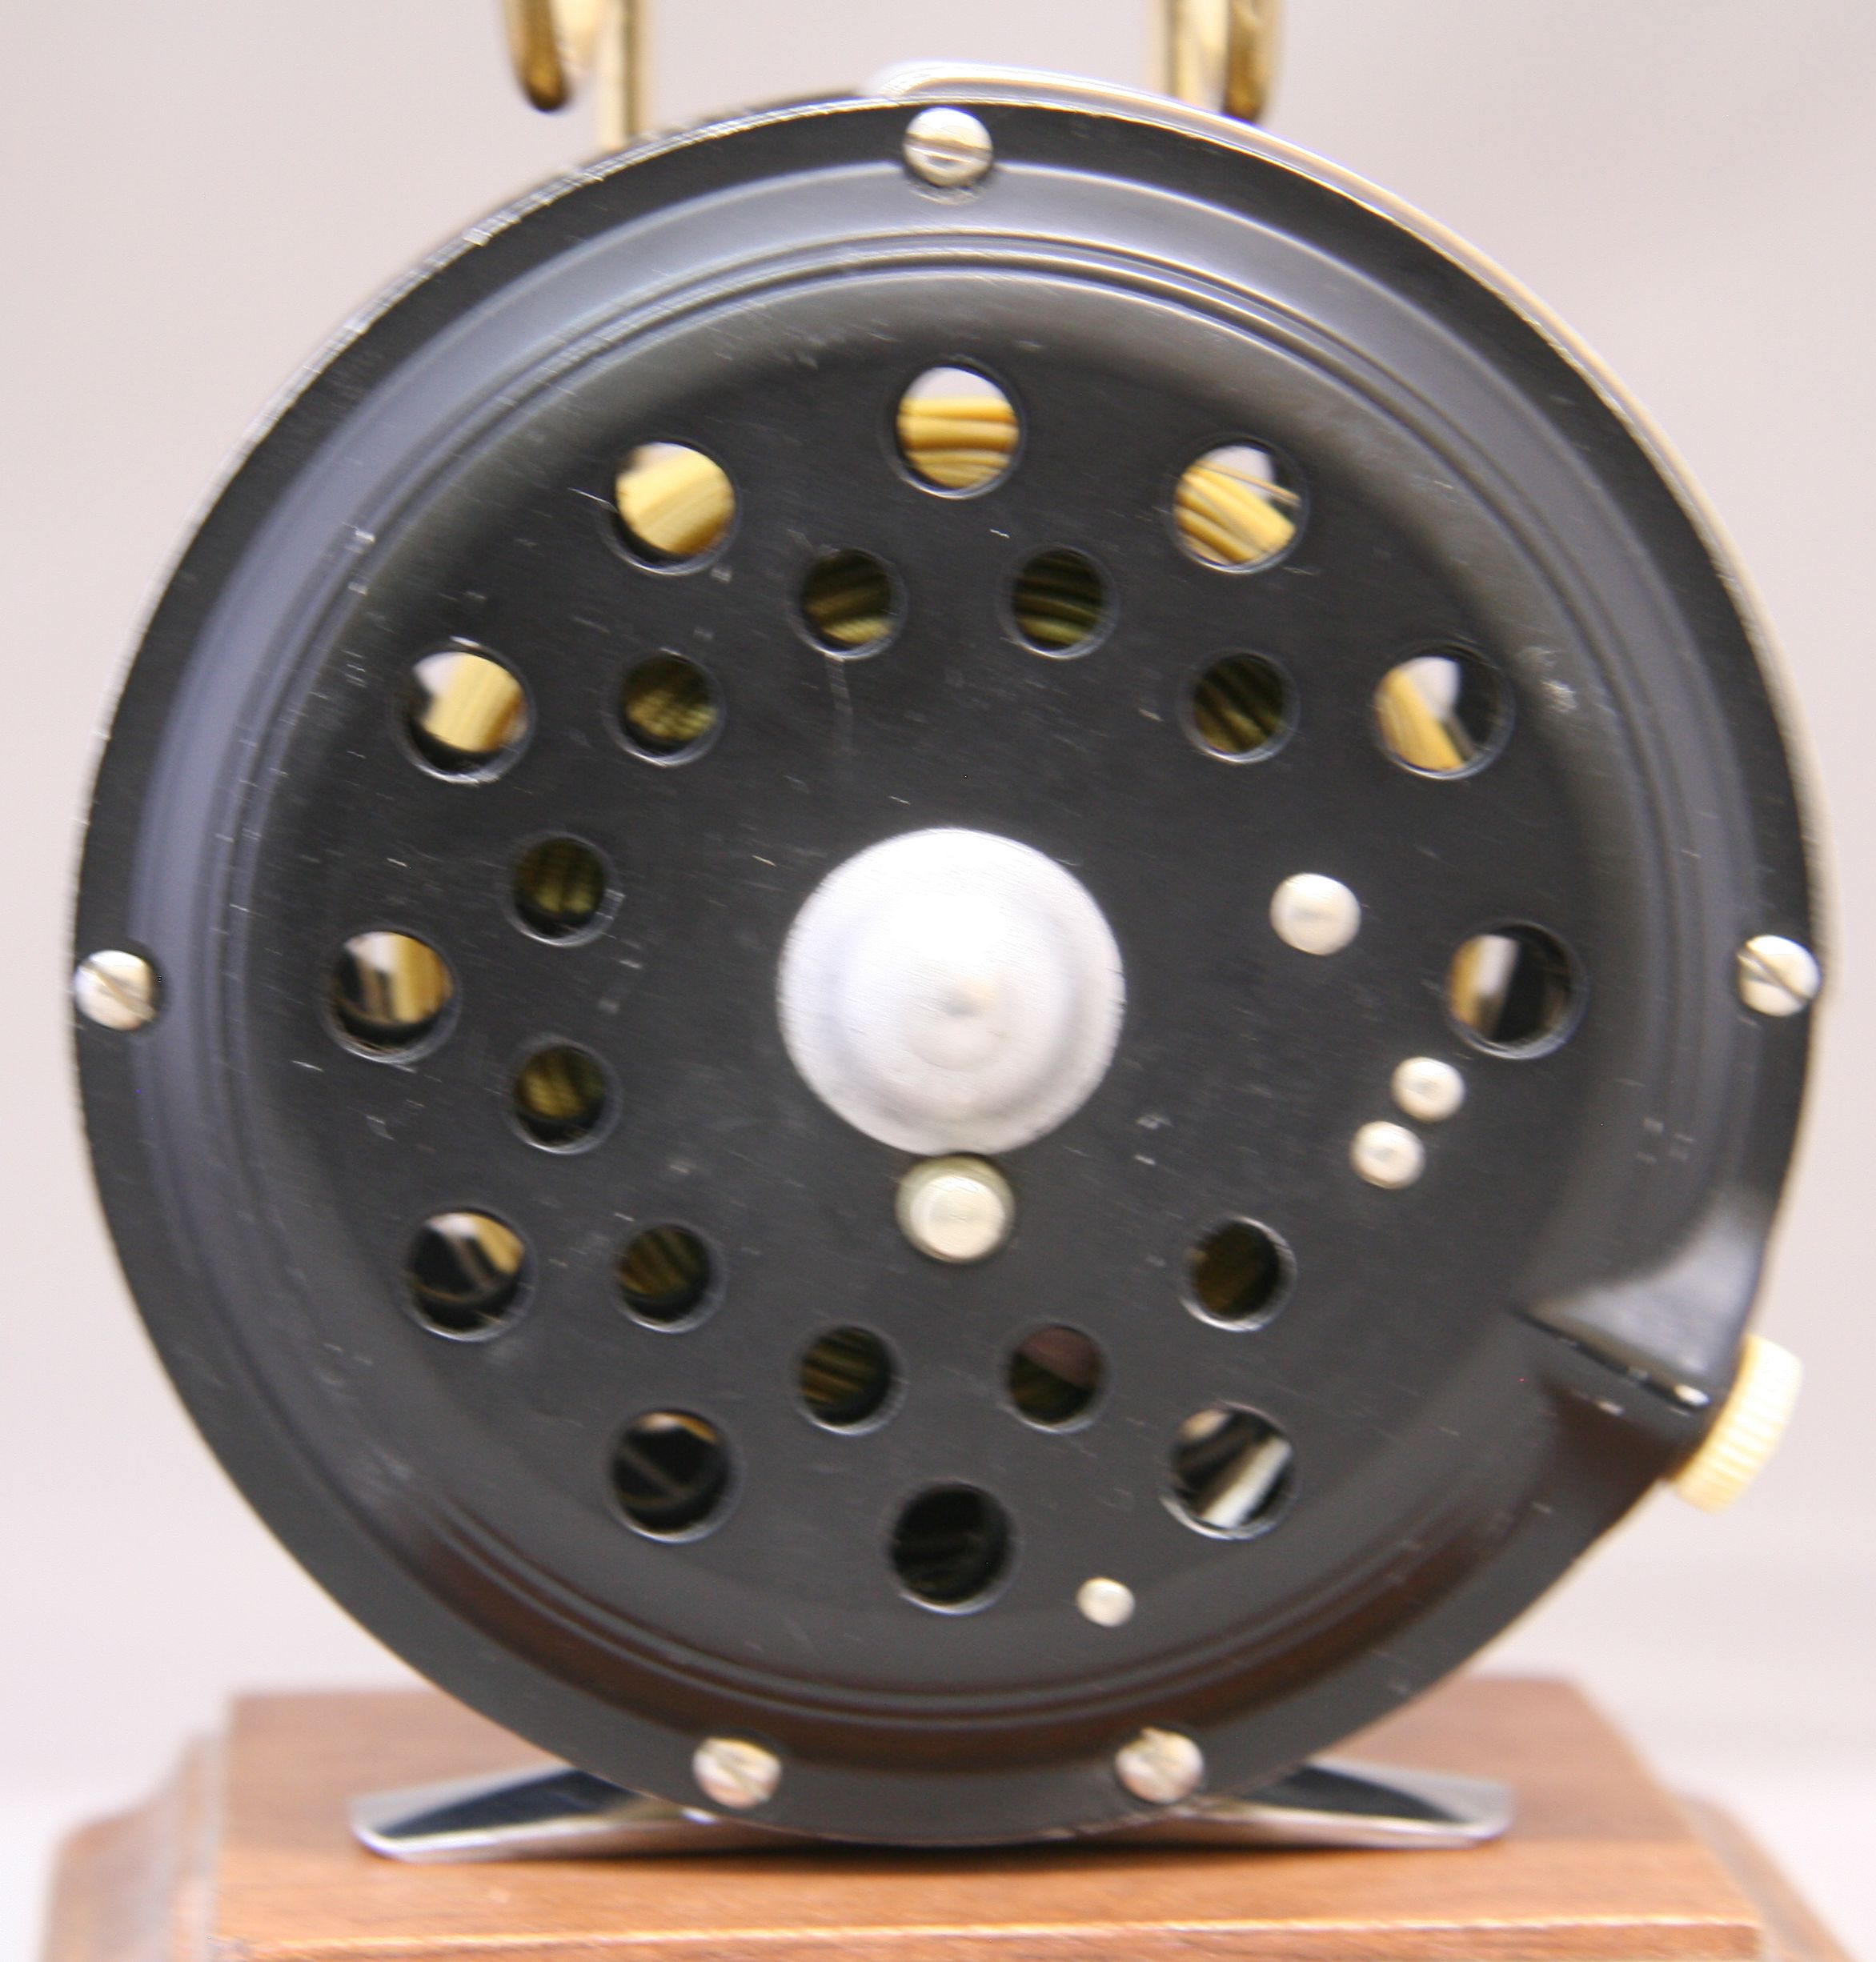 Product Details - Rick's Rods Vintage Fly Fishing Rods, Reels, and ...